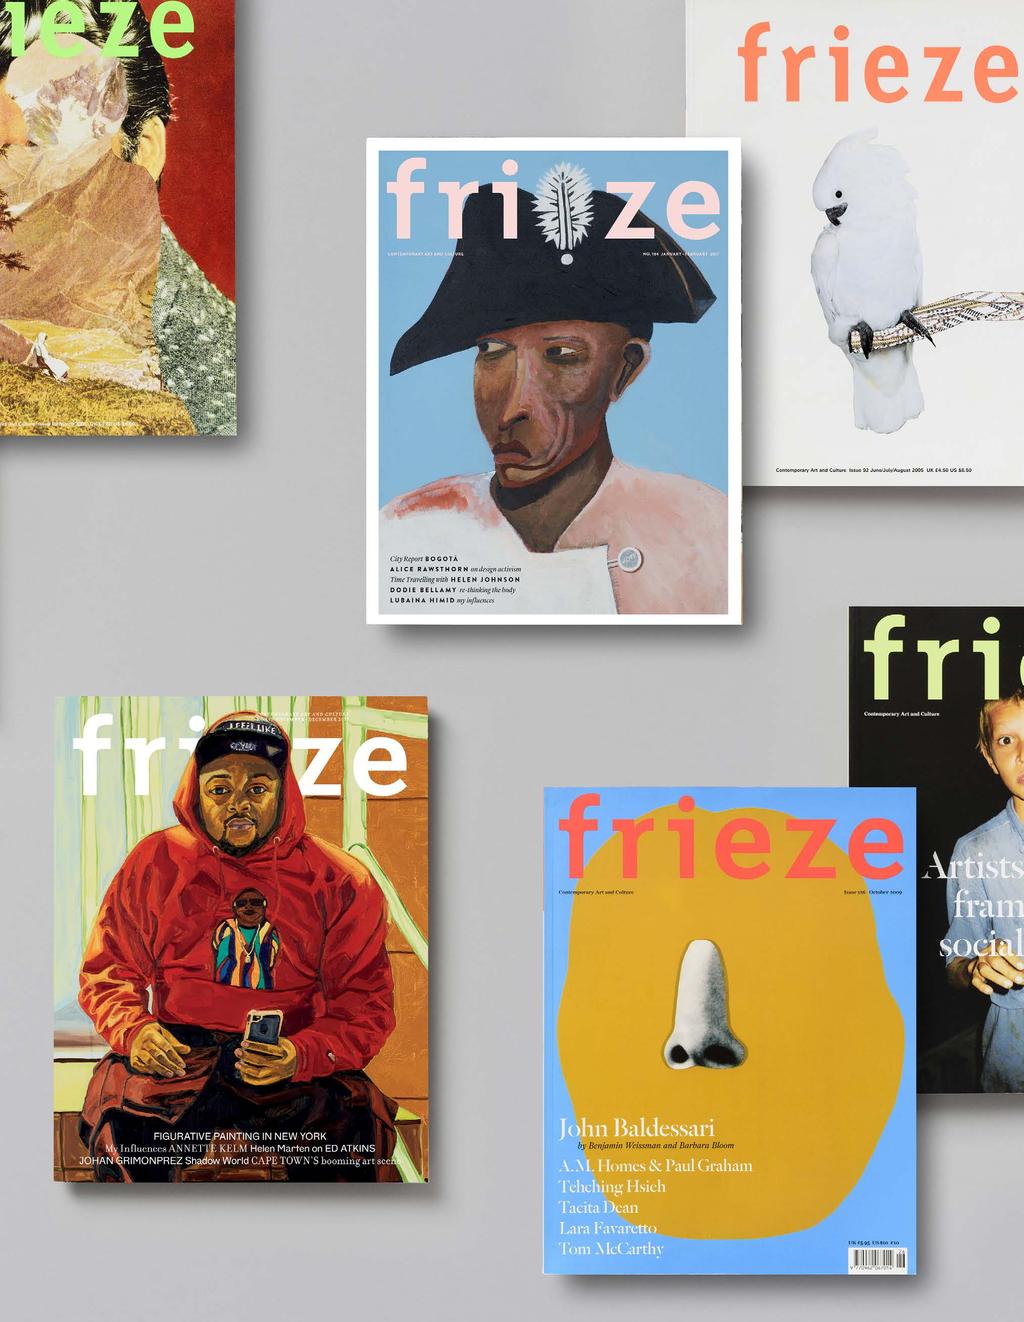 Overview Frieze reaches over 1,700,000 people across the globe every year frieze 214,070 frieze has been showcasing the world s most interesting and innovative art and artists for over 25 years.